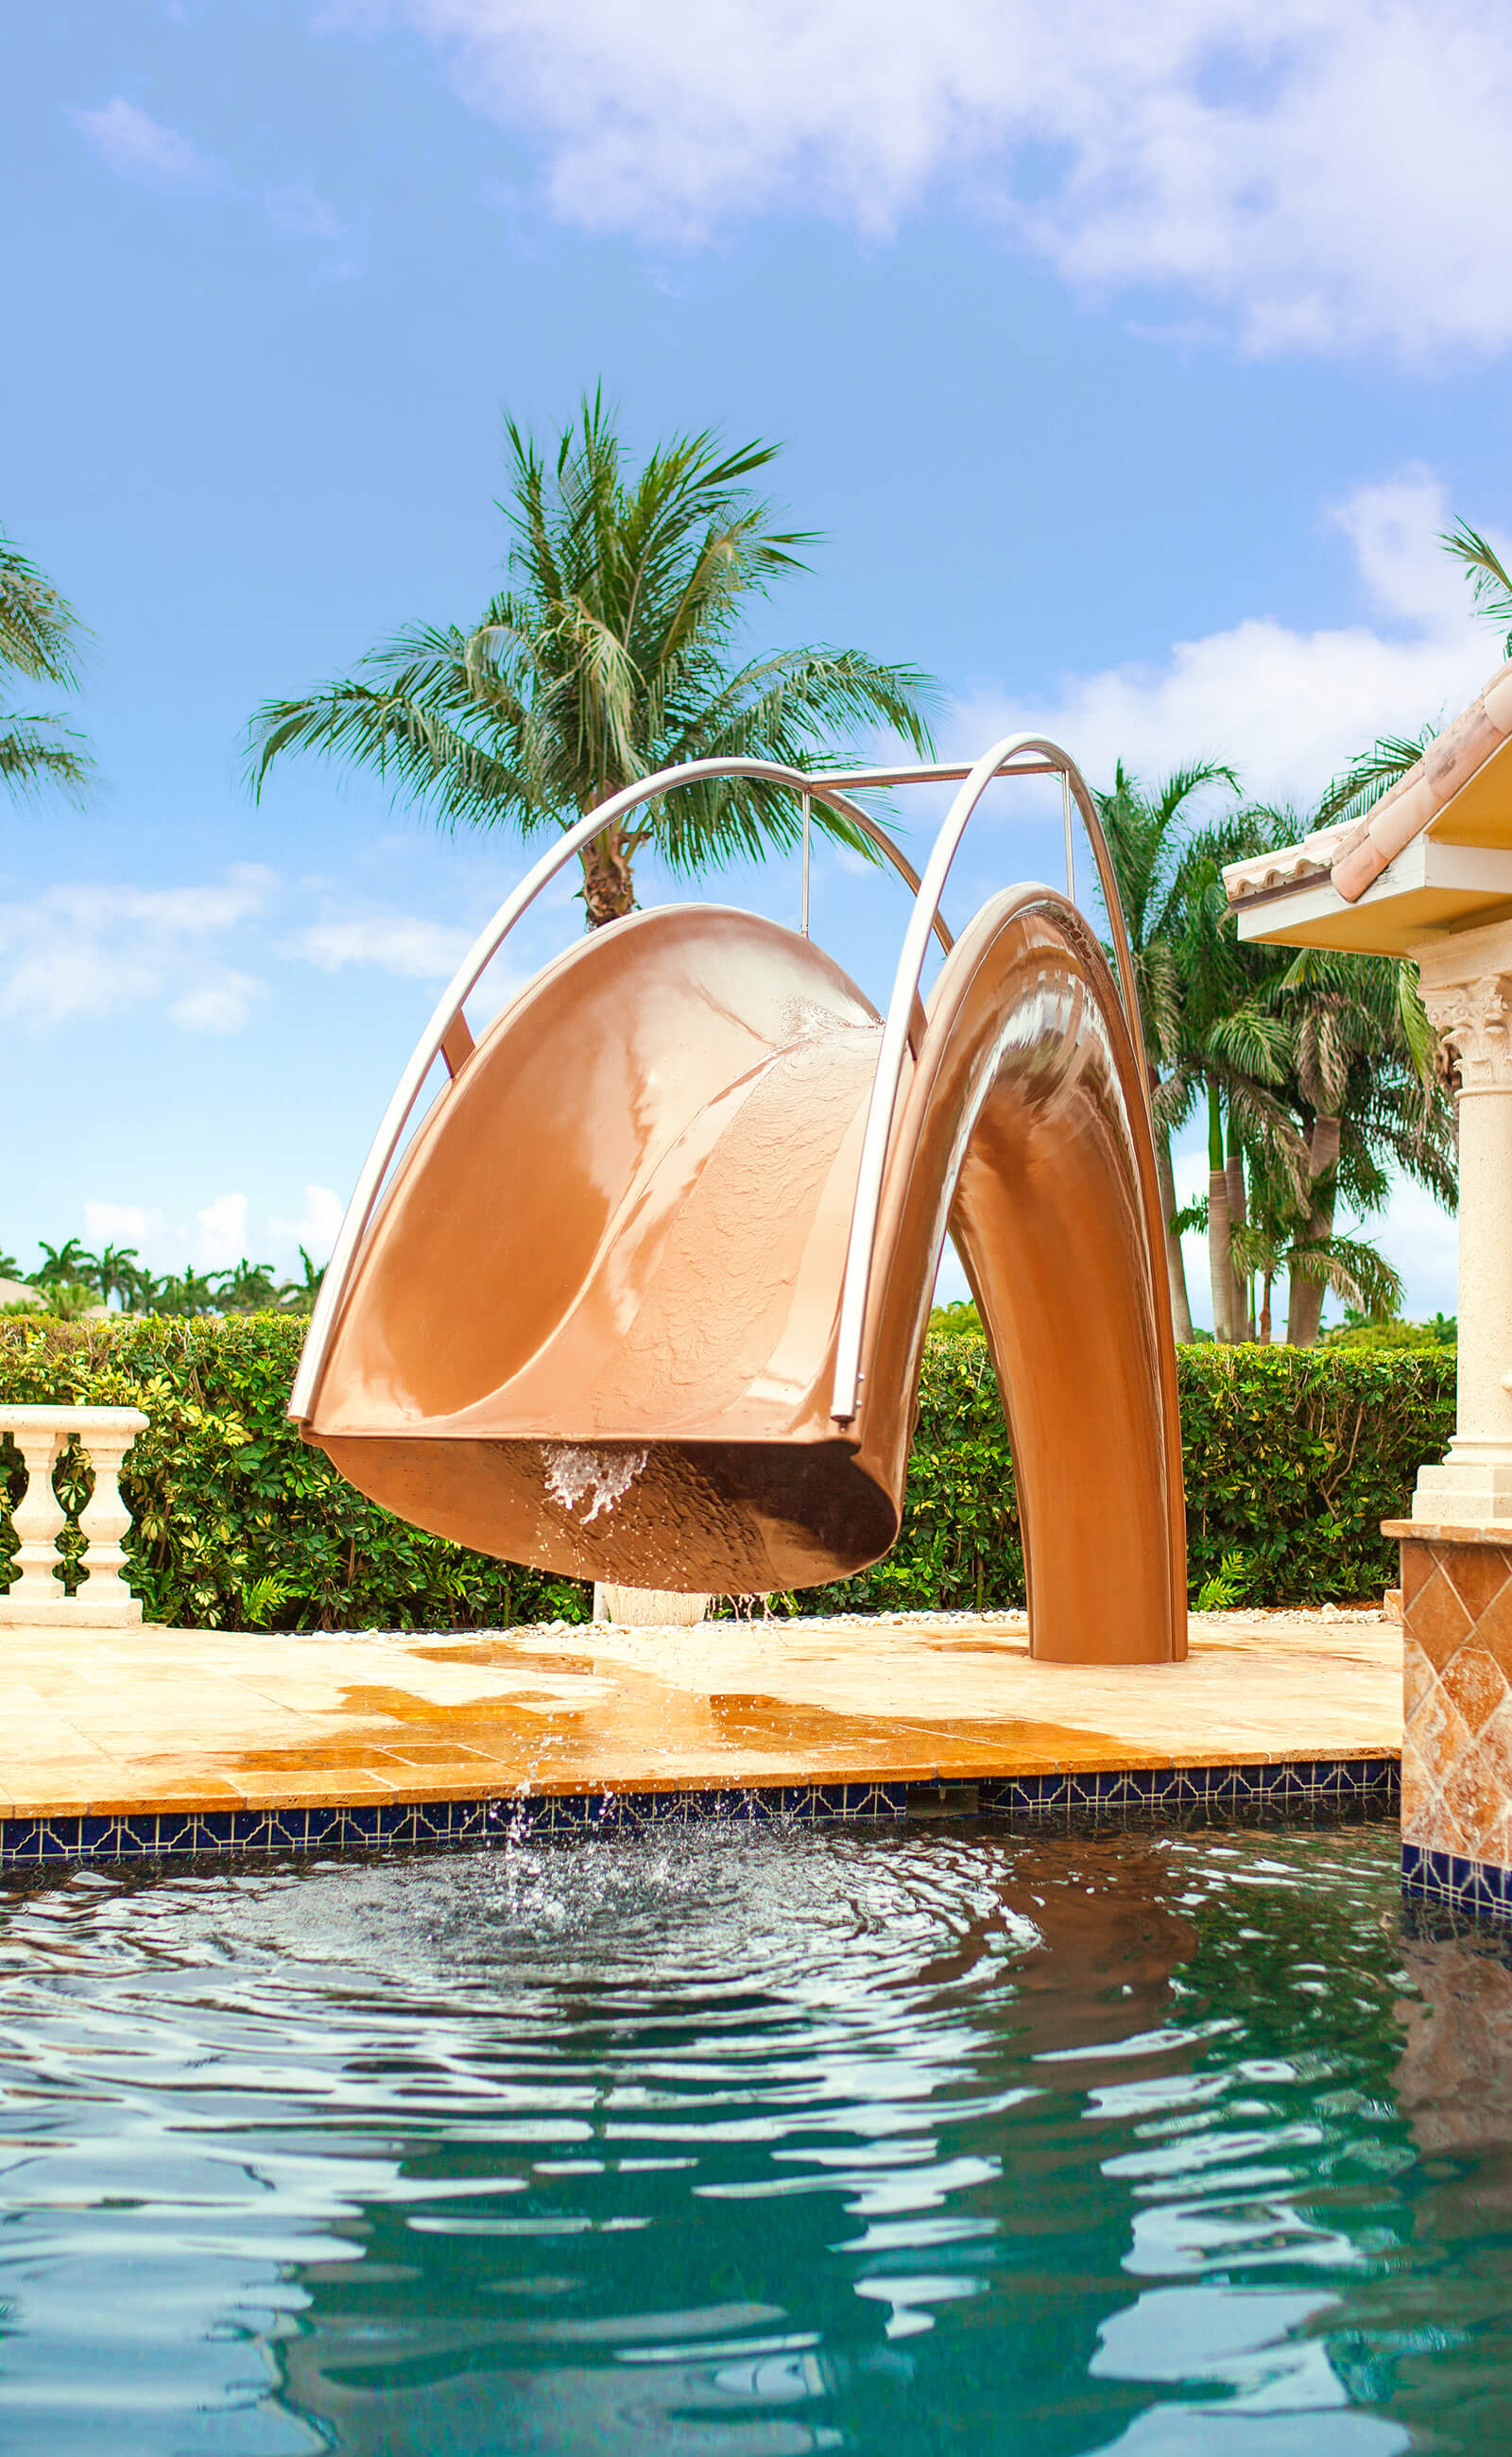 Water cooling system designed into family pool slide next to outdoor pool and palm trees.